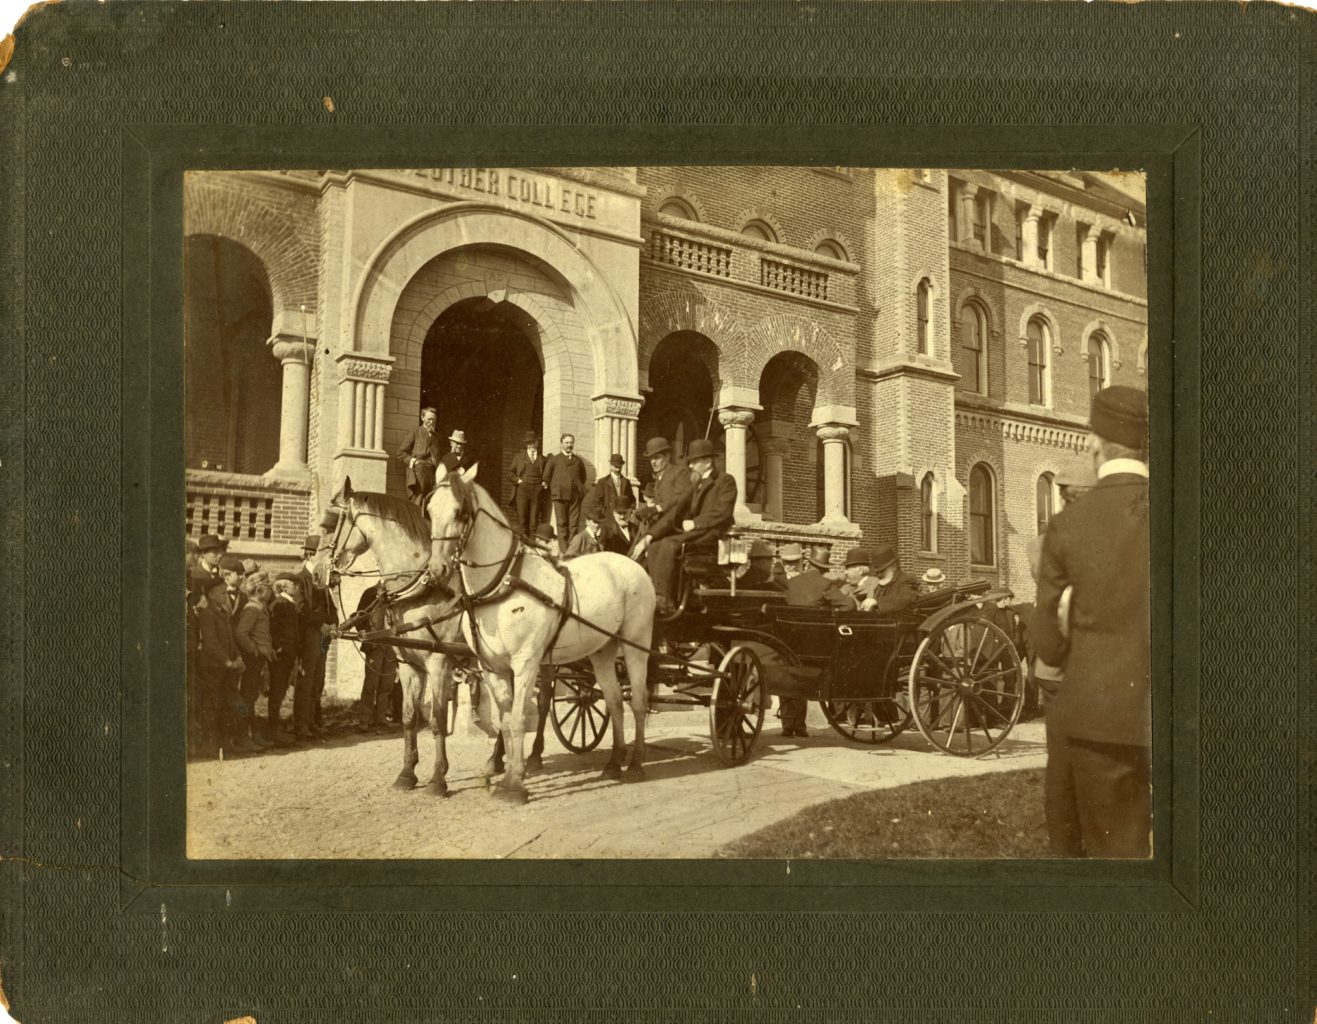 Men outside of Luther's Main Building with horse and buggy.